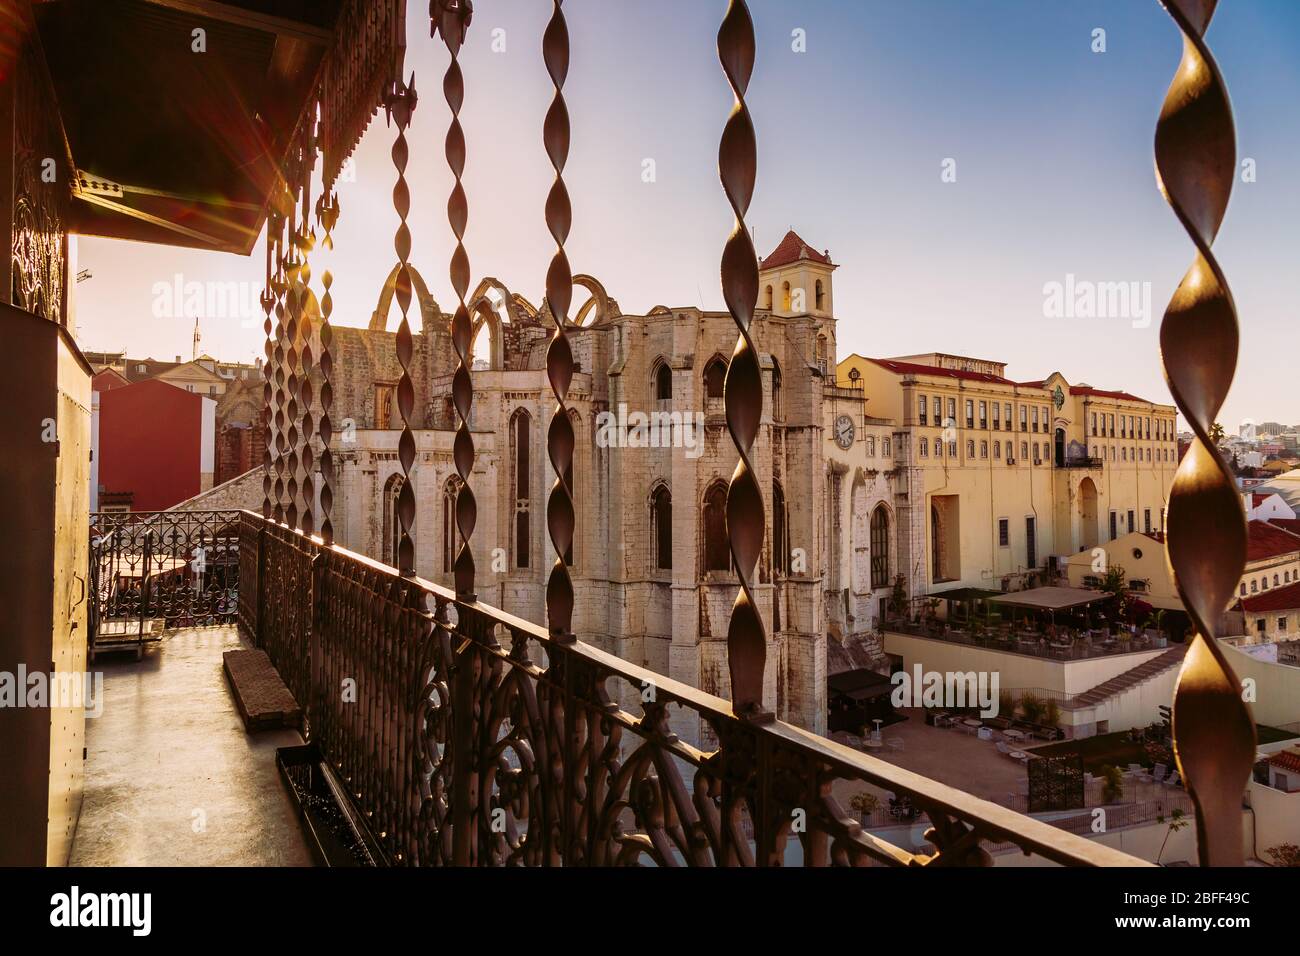 Carmo Convent building during susnet seen from Santa Justa Lift in Lisbon, Portugal Stock Photo